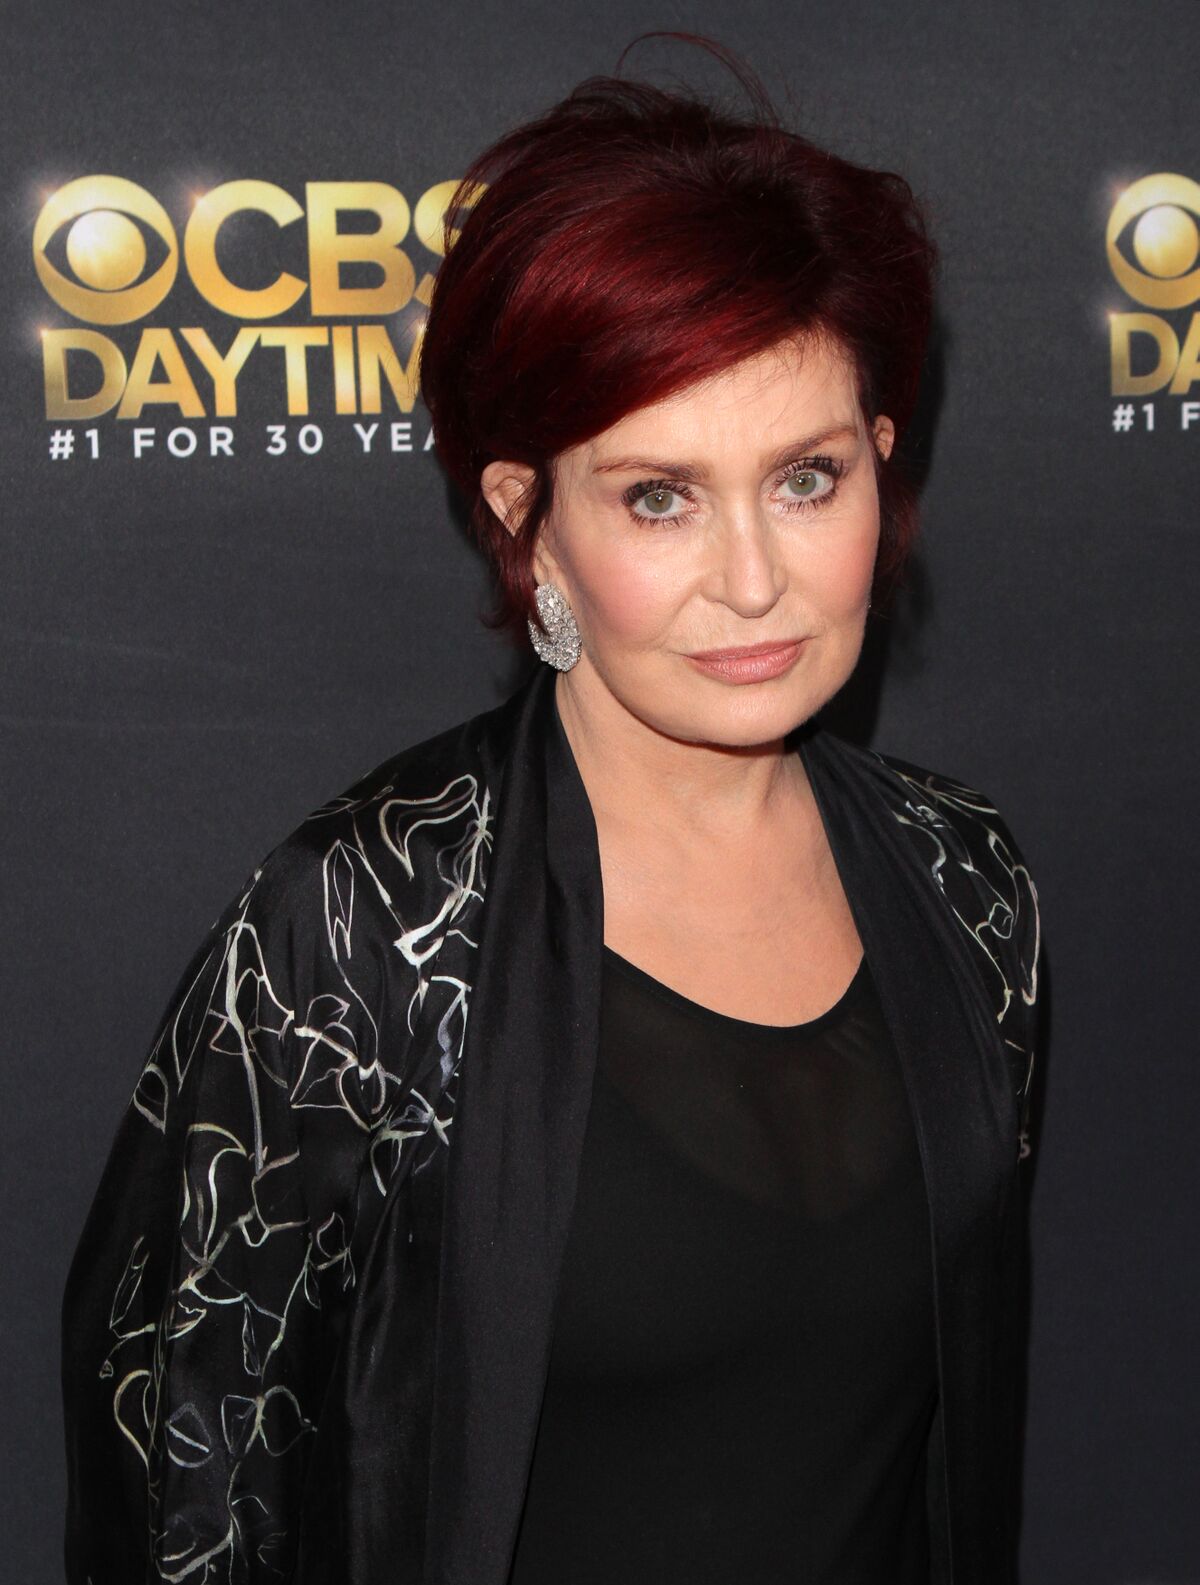  TV personality Sharon Osbourne attends the CBS Daytime Emmy after party at Pasadena Civic Auditorium on April 30, 2017 in Pasadena, California | Photo: Getty Images